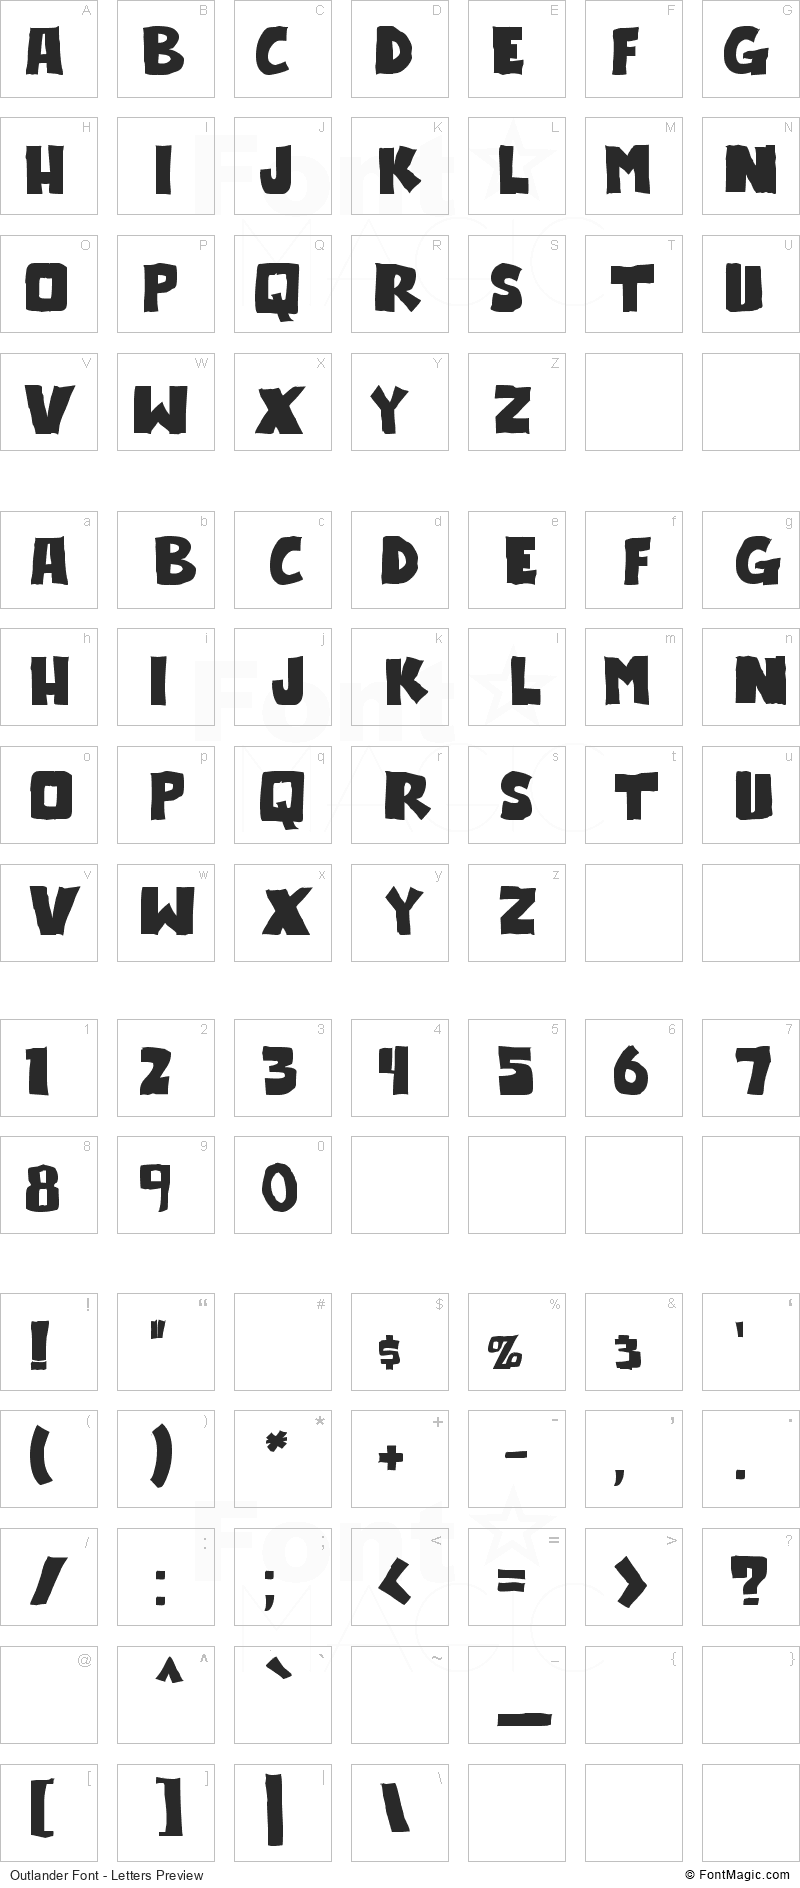 Outlander Font - All Latters Preview Chart